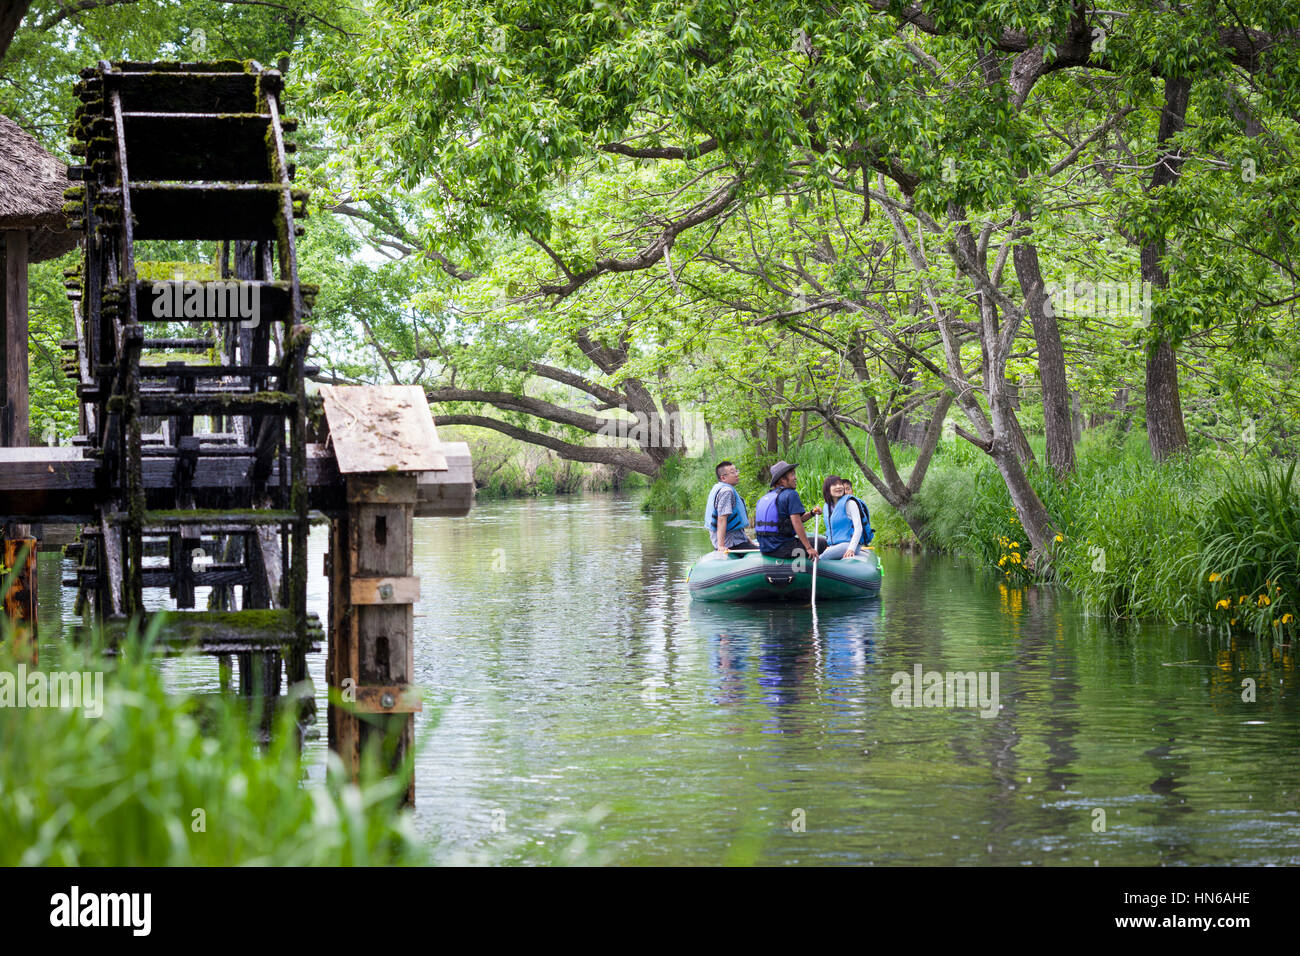 AZUMINO, JAPAN - MAY 14: Tourists on a boat trip down the Yorozui river pass a wooden watermill at Daio Wasabi Farm, Azumino on 14th May 2012. Daio is Stock Photo